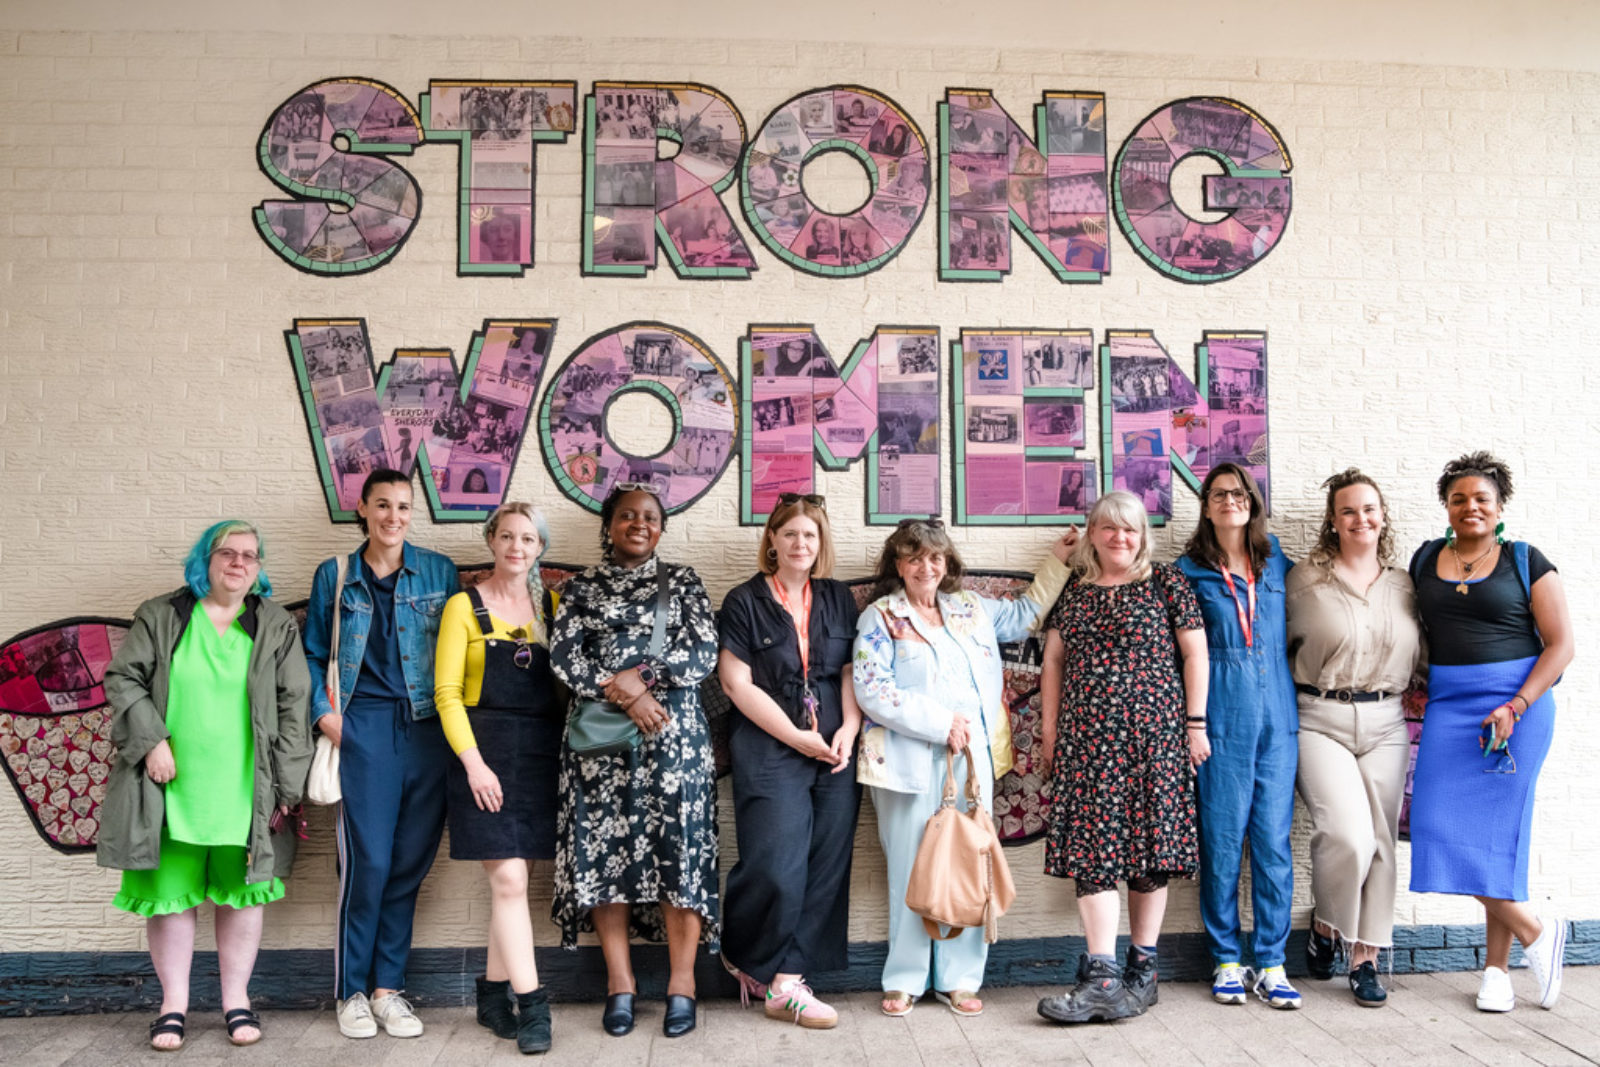 10 women smile for the camera stood in front of the mural.